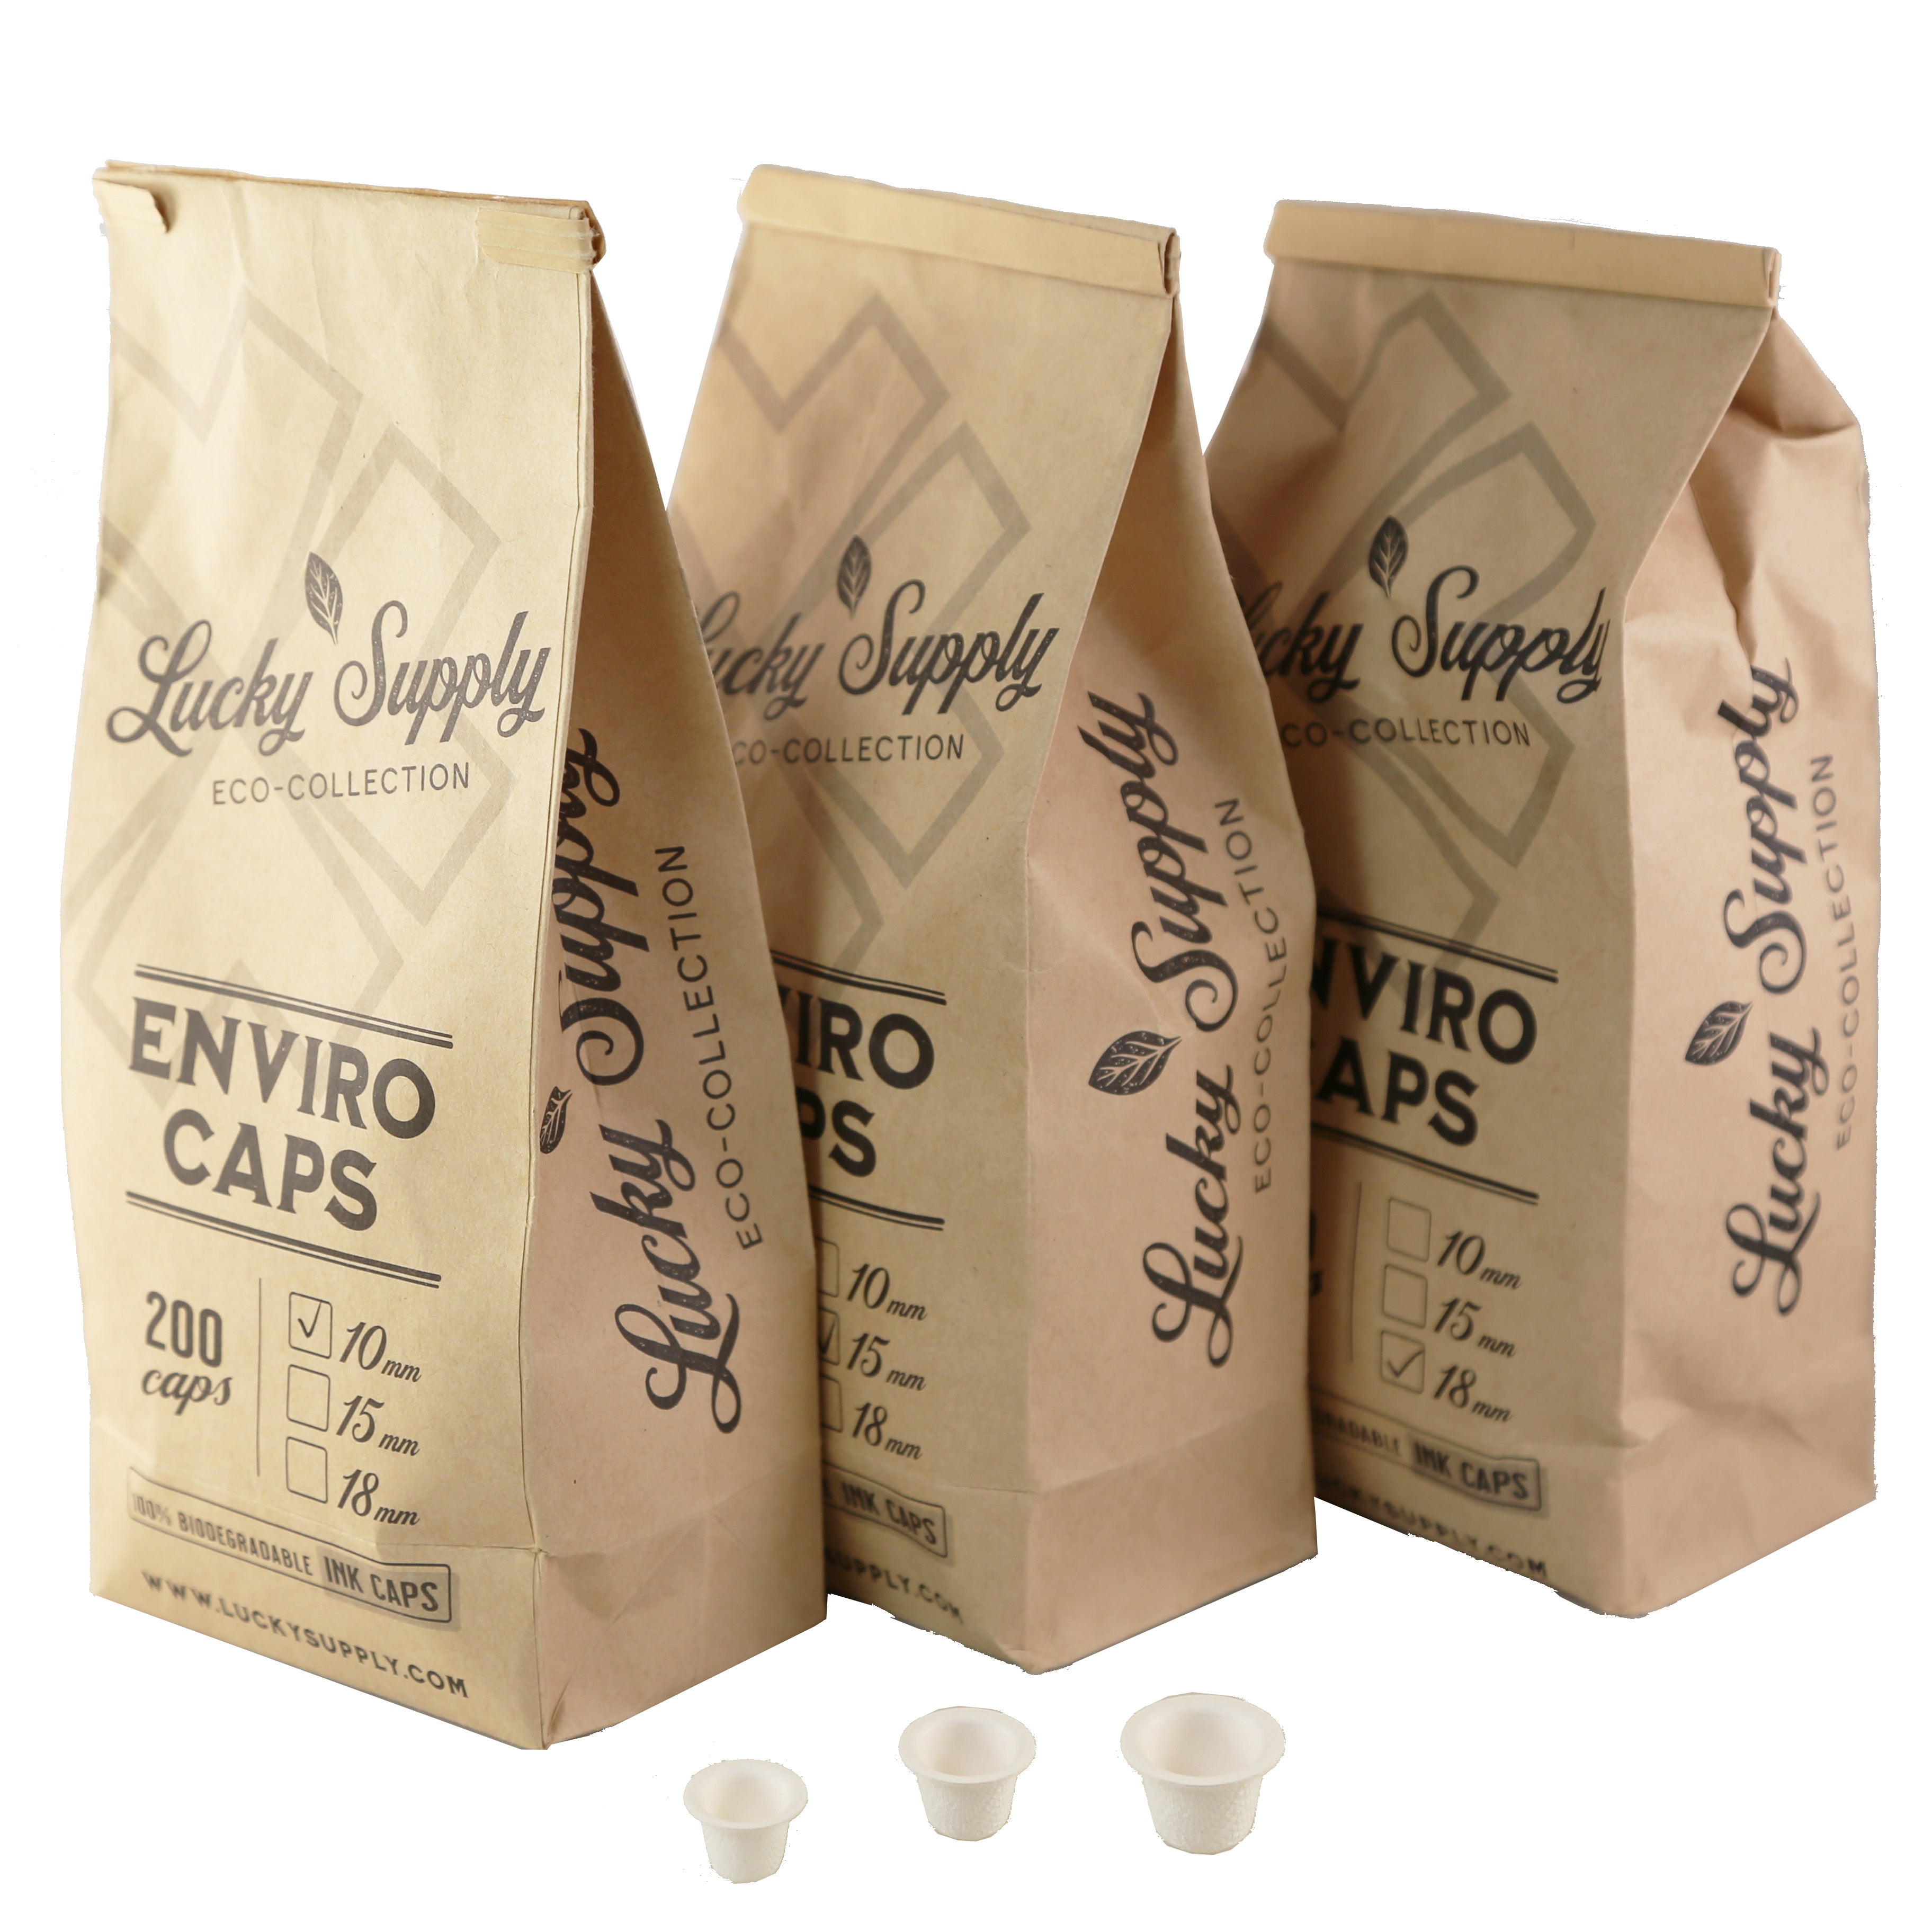 Enviro Biodegradable Caps - Paper Ink Cap Containers by Lucky Supply